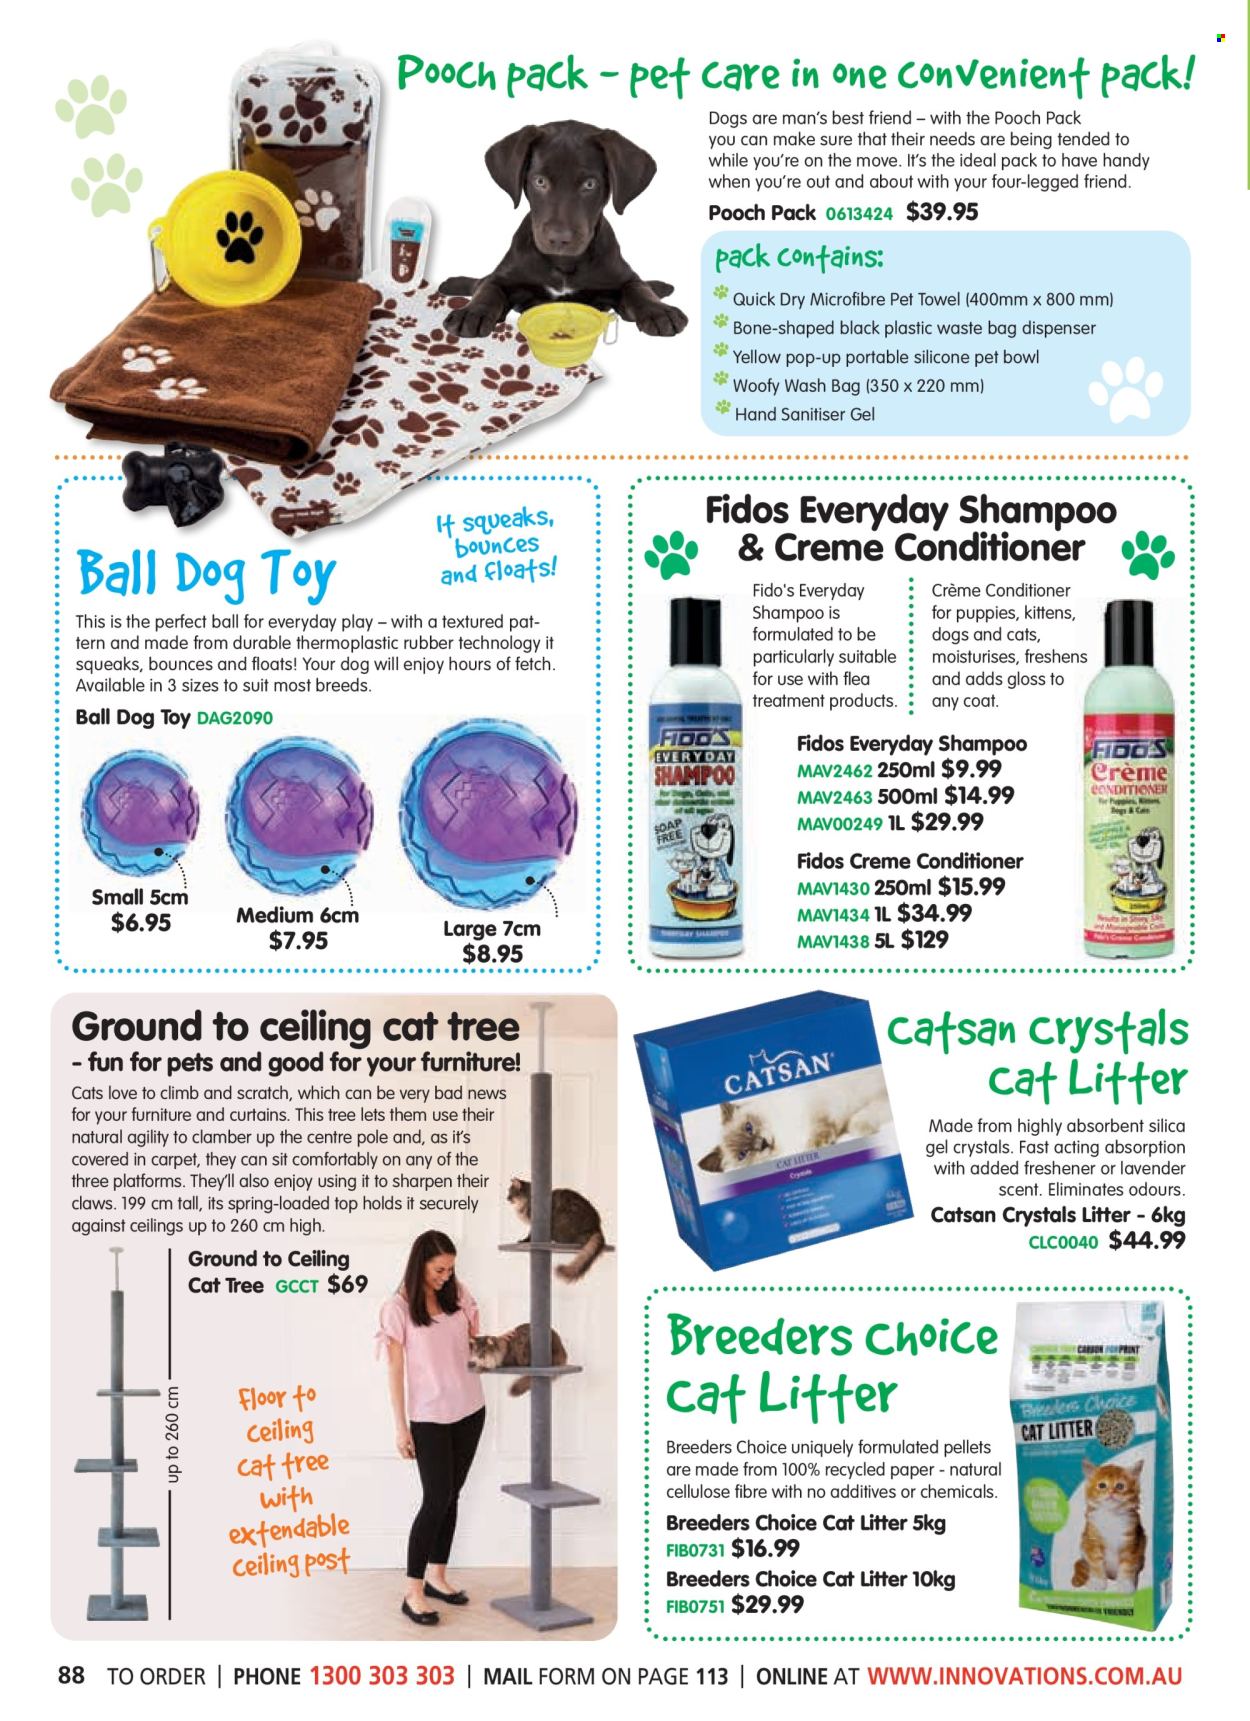 thumbnail - Innovations Catalogue - Sales products - dispenser, bowl, eraser, curtain, towel, cat litter, dog toy, Catsan, cat tree, pet towel. Page 88.